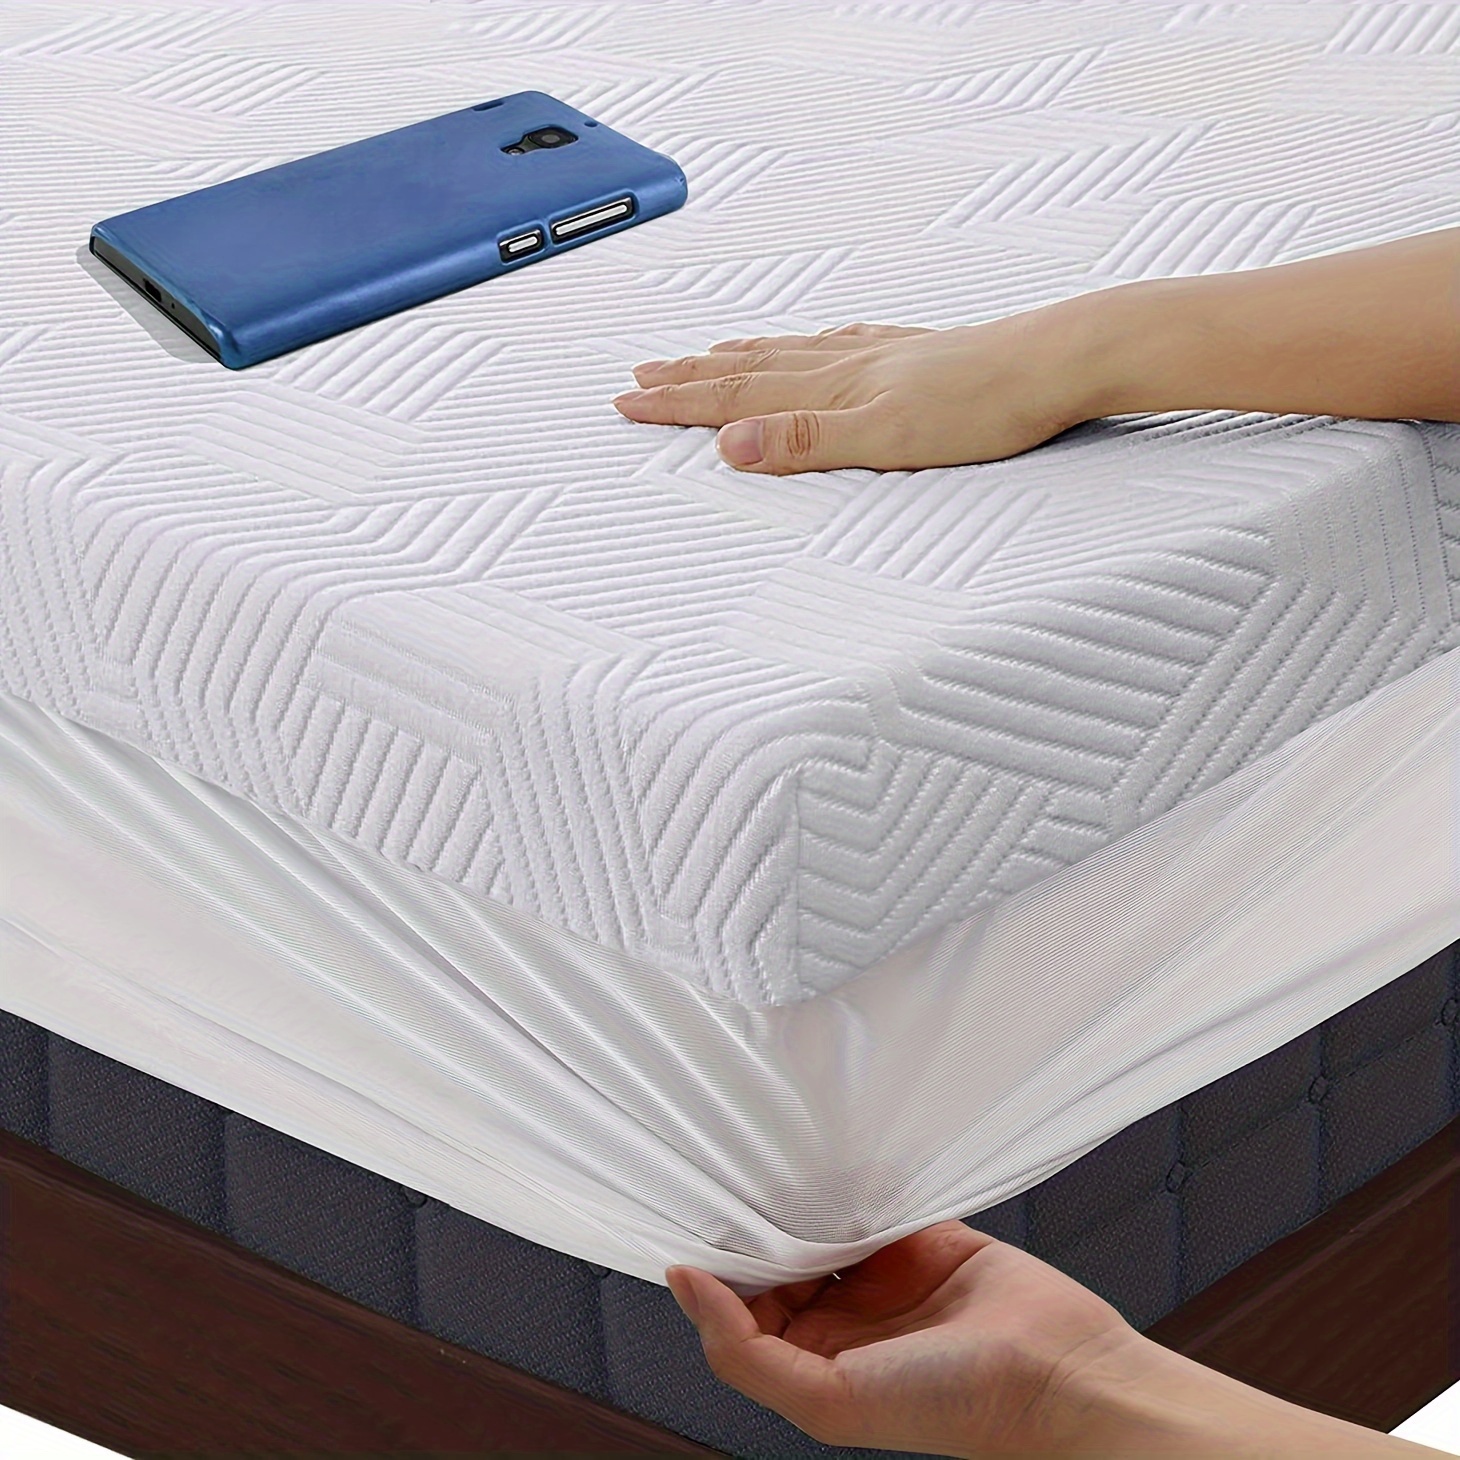 

Mattress Topper Memory Foam 3 Inch Gel Mattress Pad Cover With 18'' Deep Pocket For Bed Topper With Removable Rayon Made From Bamboo Cover Soft & Breathable